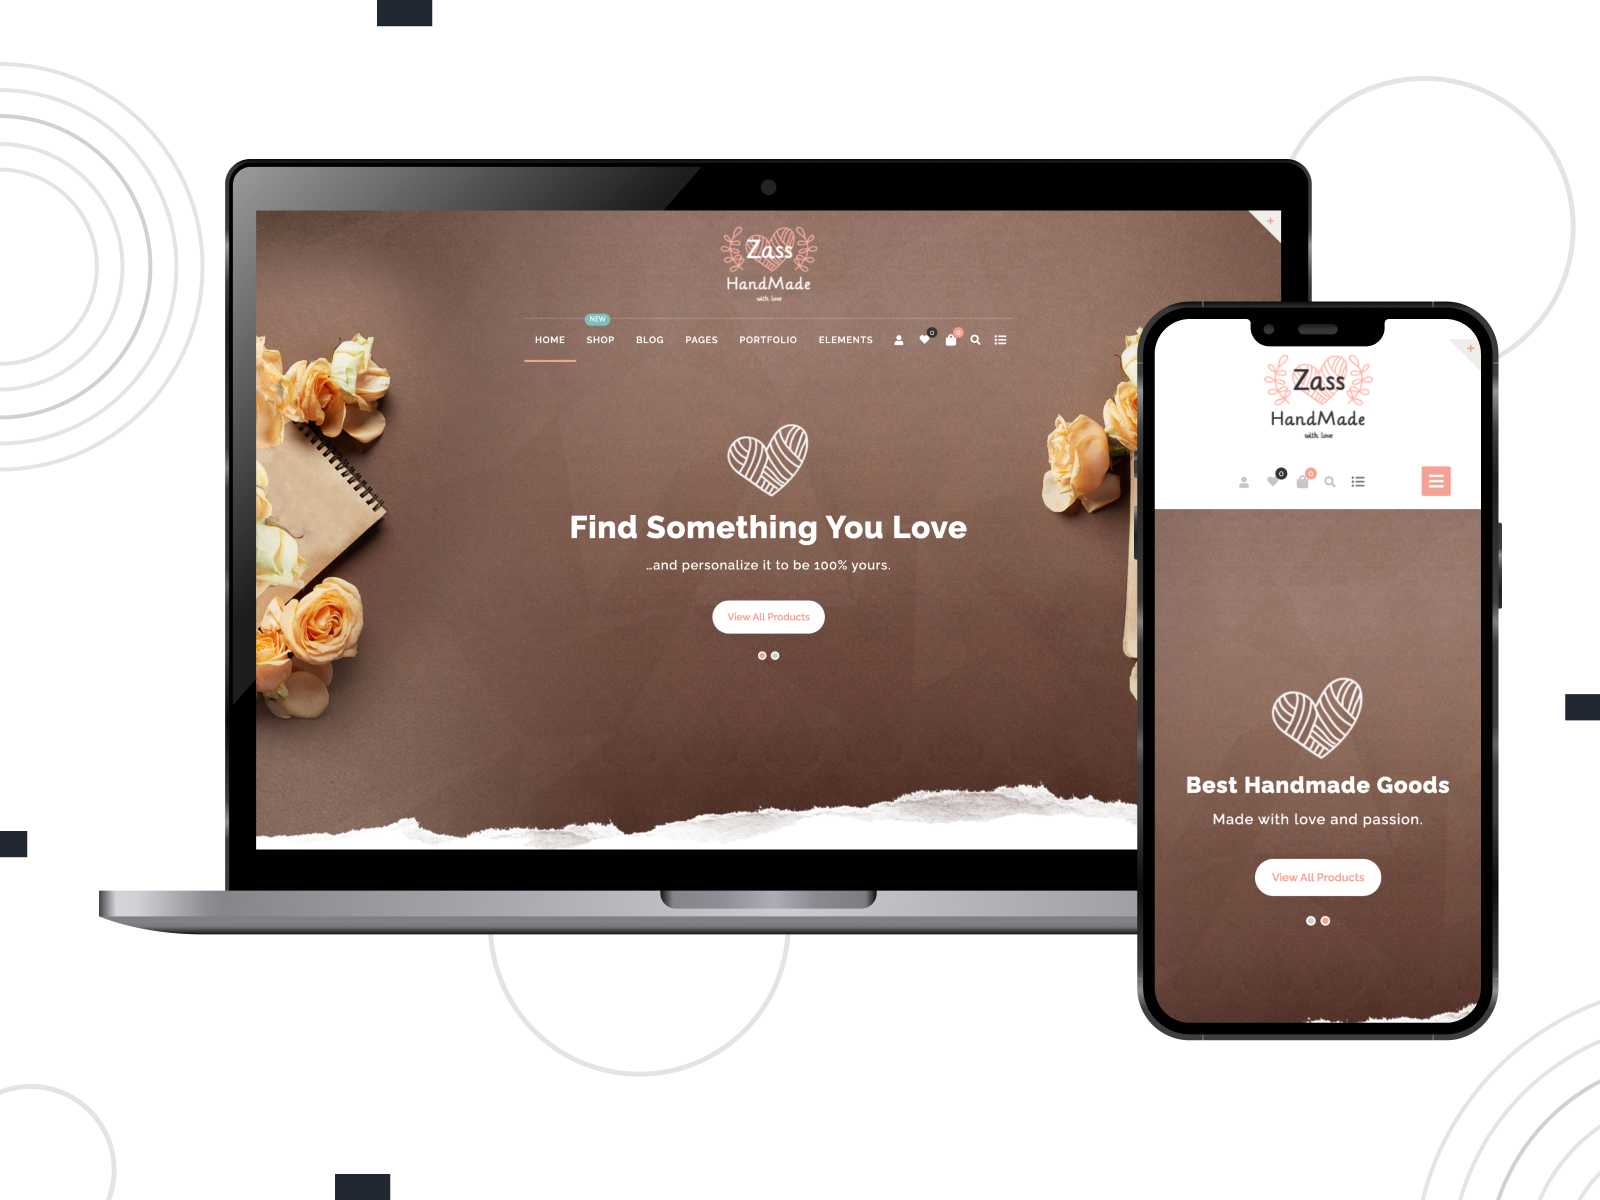 Photograph of Zass, a customizable WordPress theme for handmade stores with a multi-vendor marketplace in lightsalmon, white, and darkgray colorway.